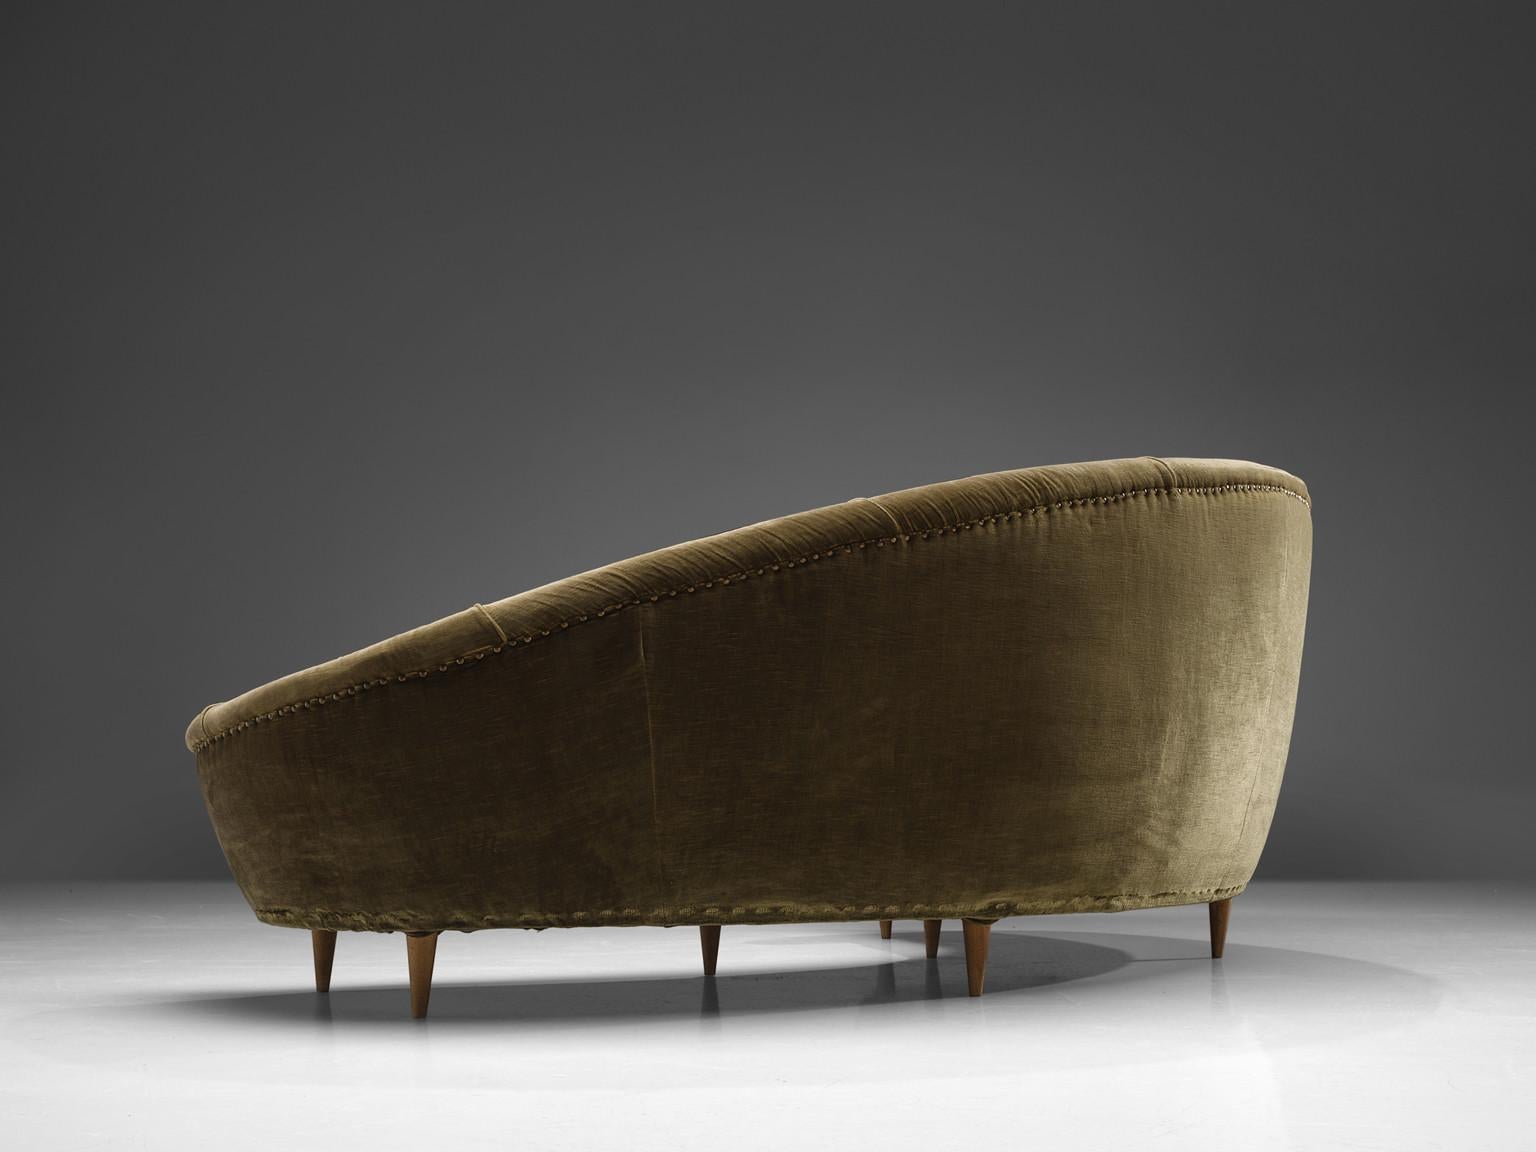 Italian sofa, velvet, beech Italy, 1950s

This dynamic Italian sofa shows strong resemblances with the designs of Federico Munari. The corpus features an a-symmetrical back that is higher on the left side and slowly slopes towards a much lower end